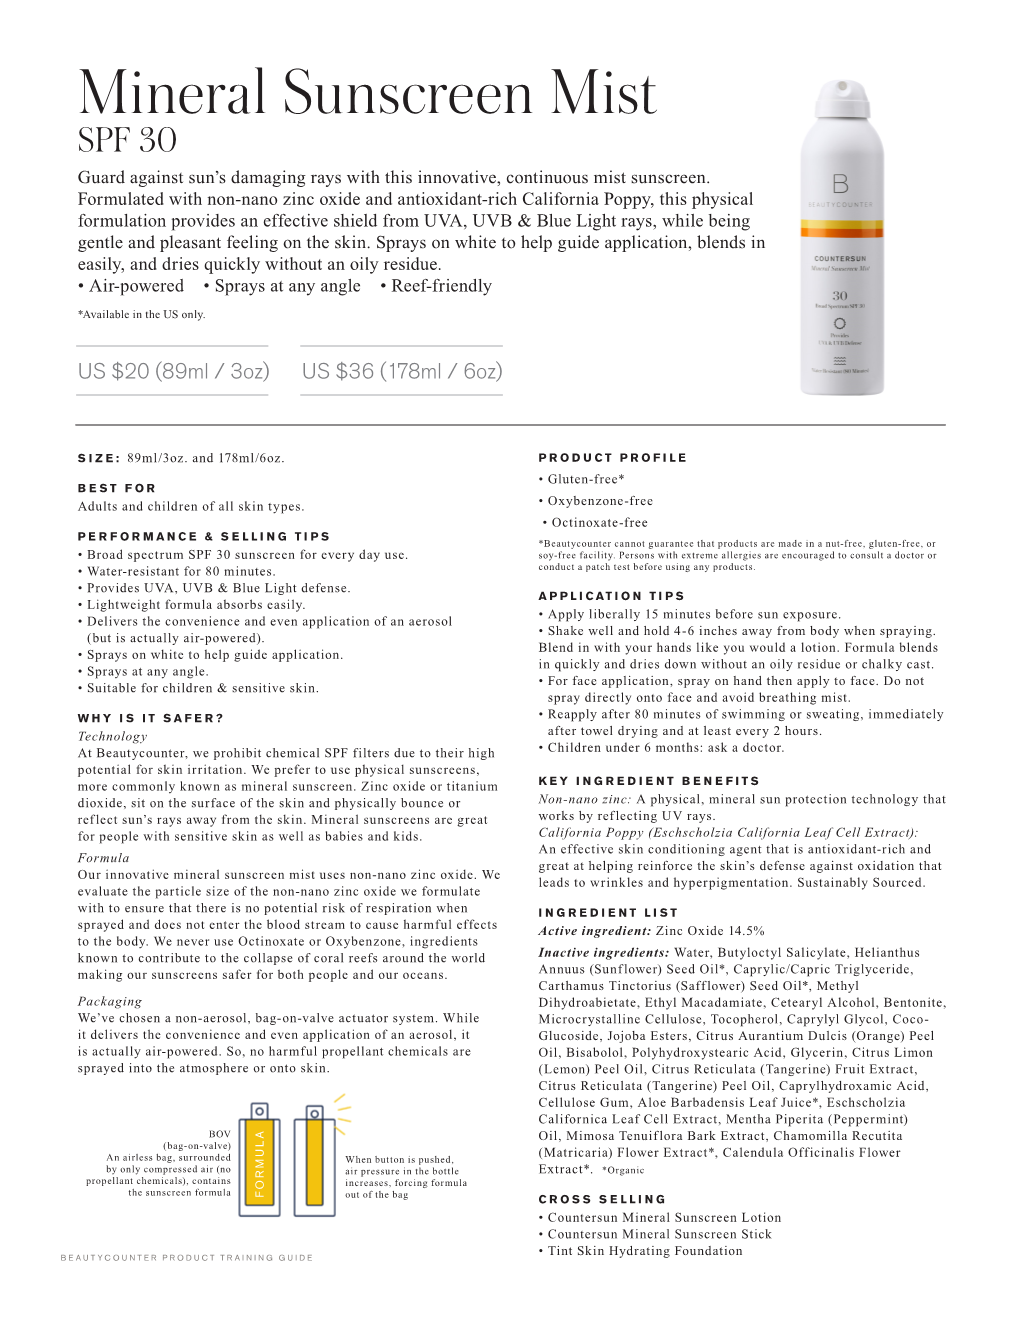 Mineral Sunscreen Mist SPF 30 Guard Against Sun’S Damaging Rays with This Innovative, Continuous Mist Sunscreen